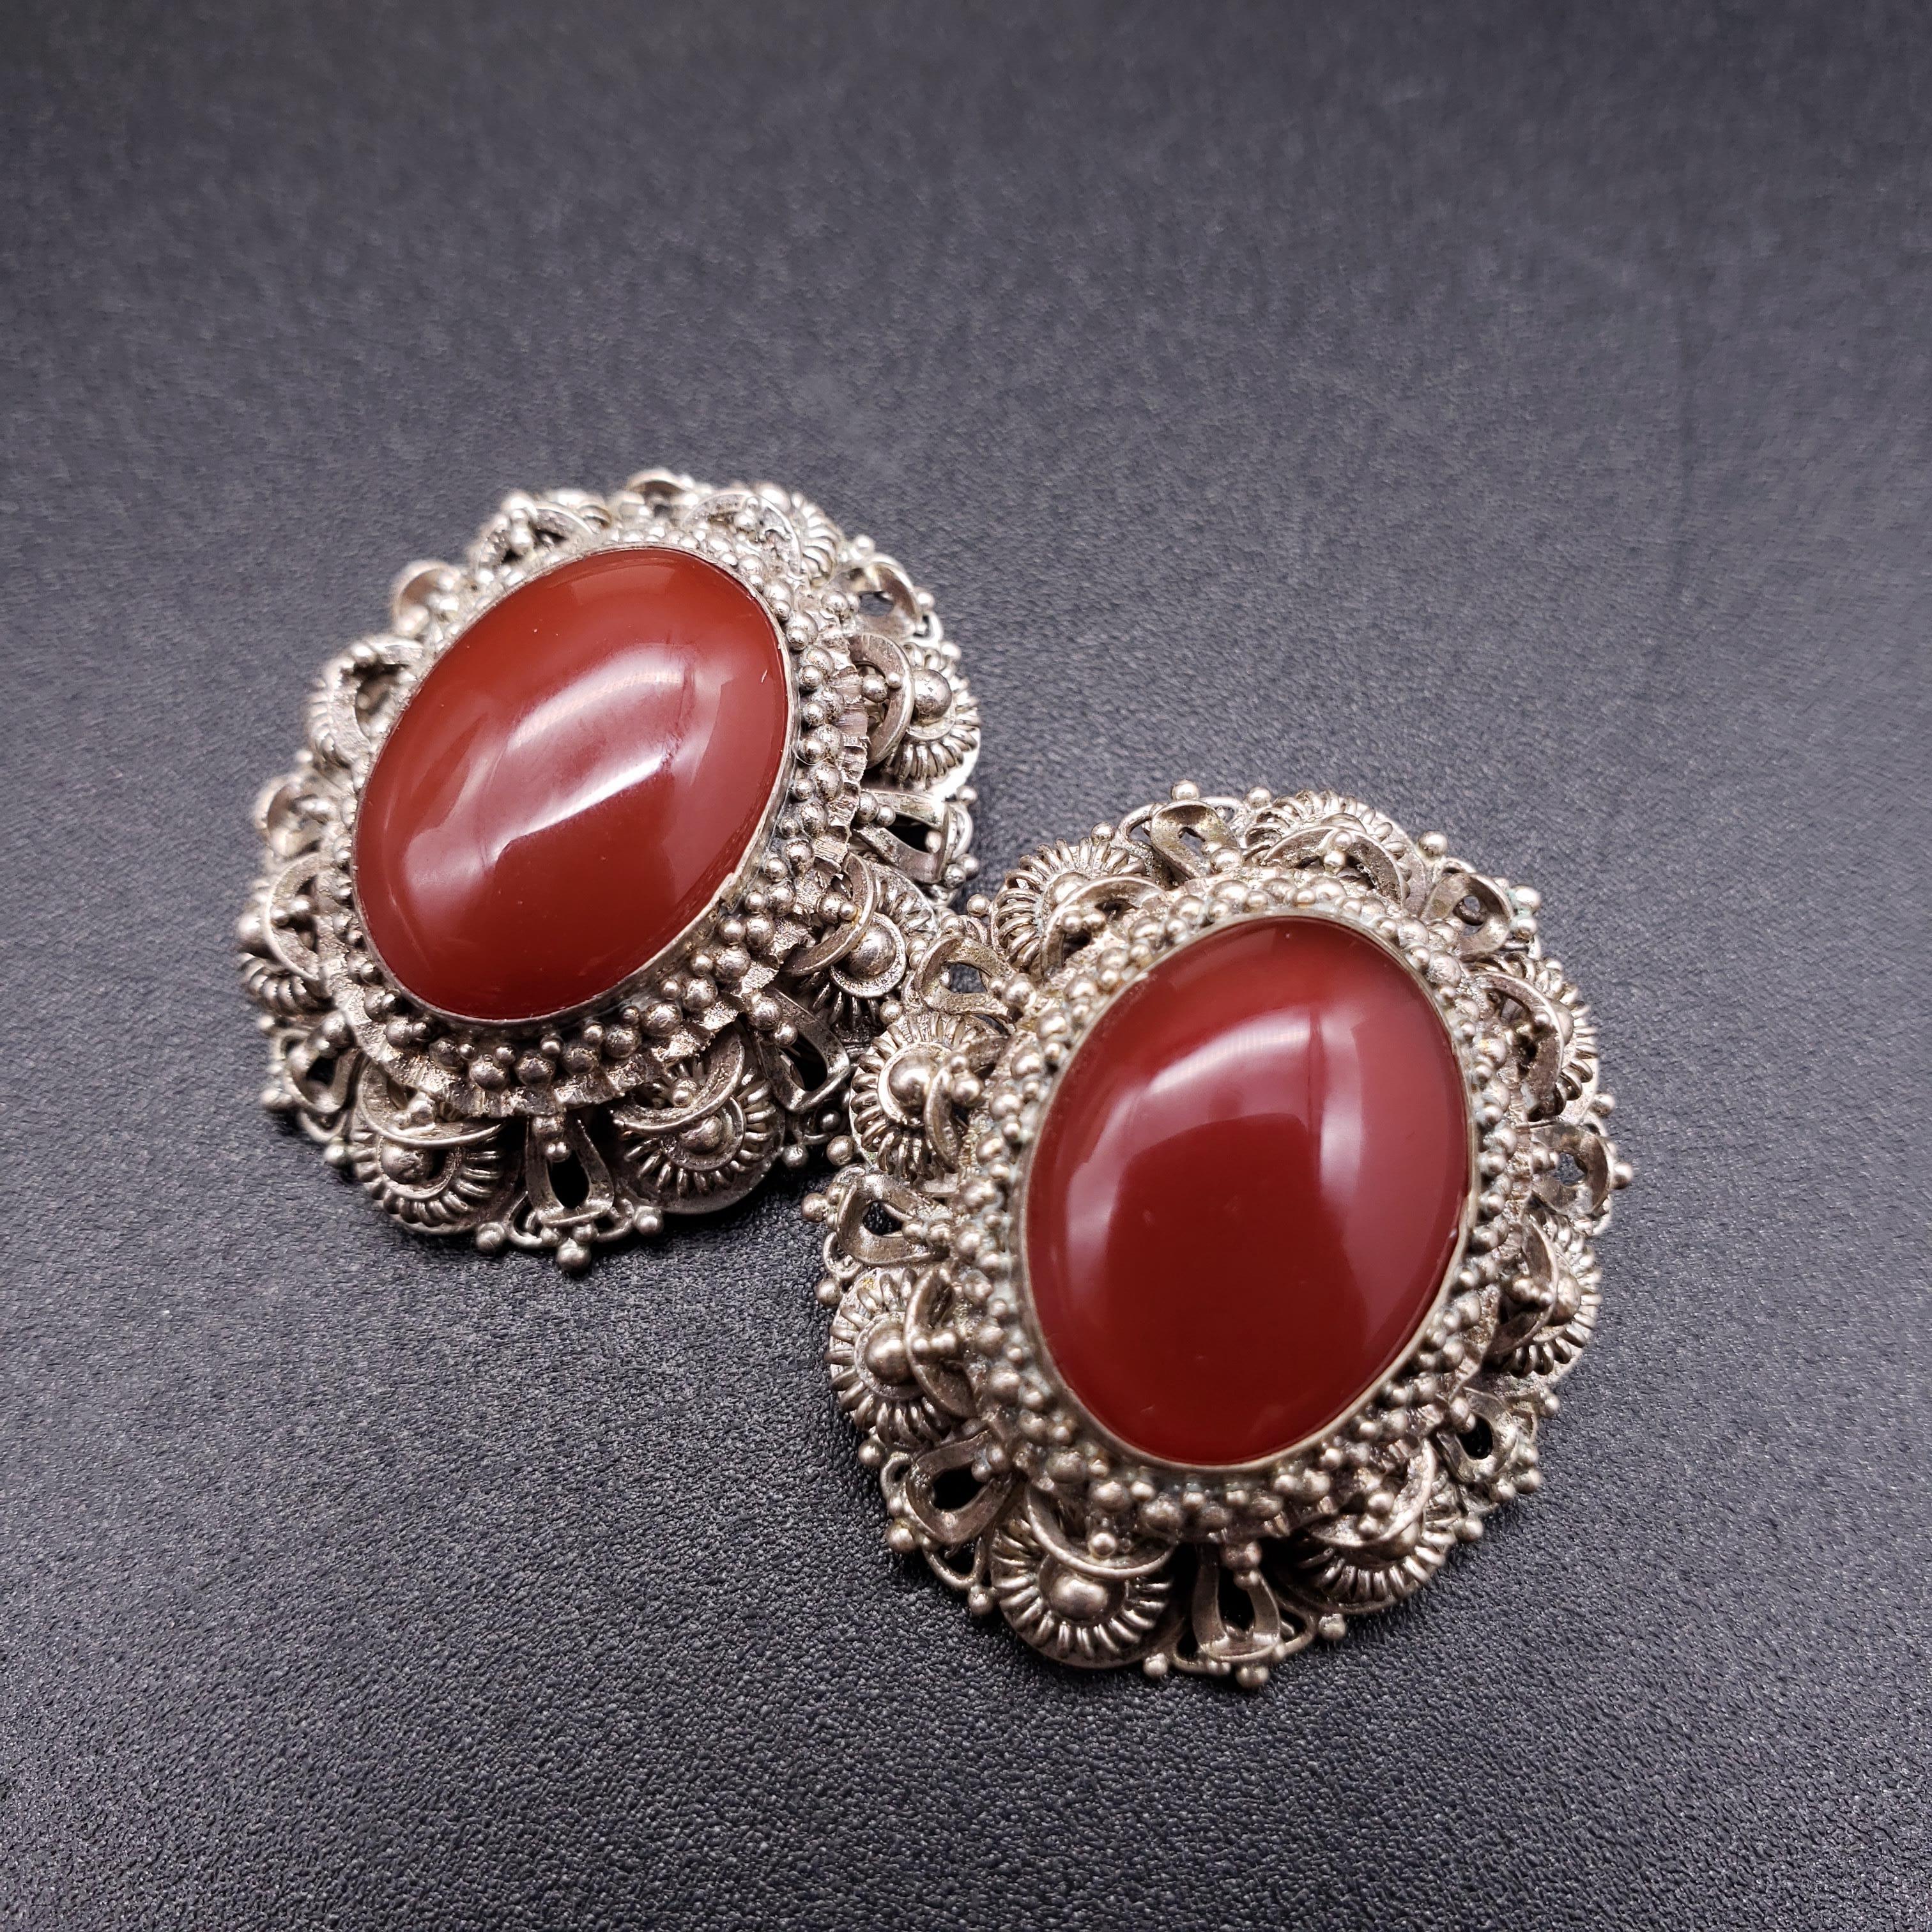 Sterling Filigree Oval Carnelian Victorian Brooch Pendant and Clip on Earrings For Sale 1